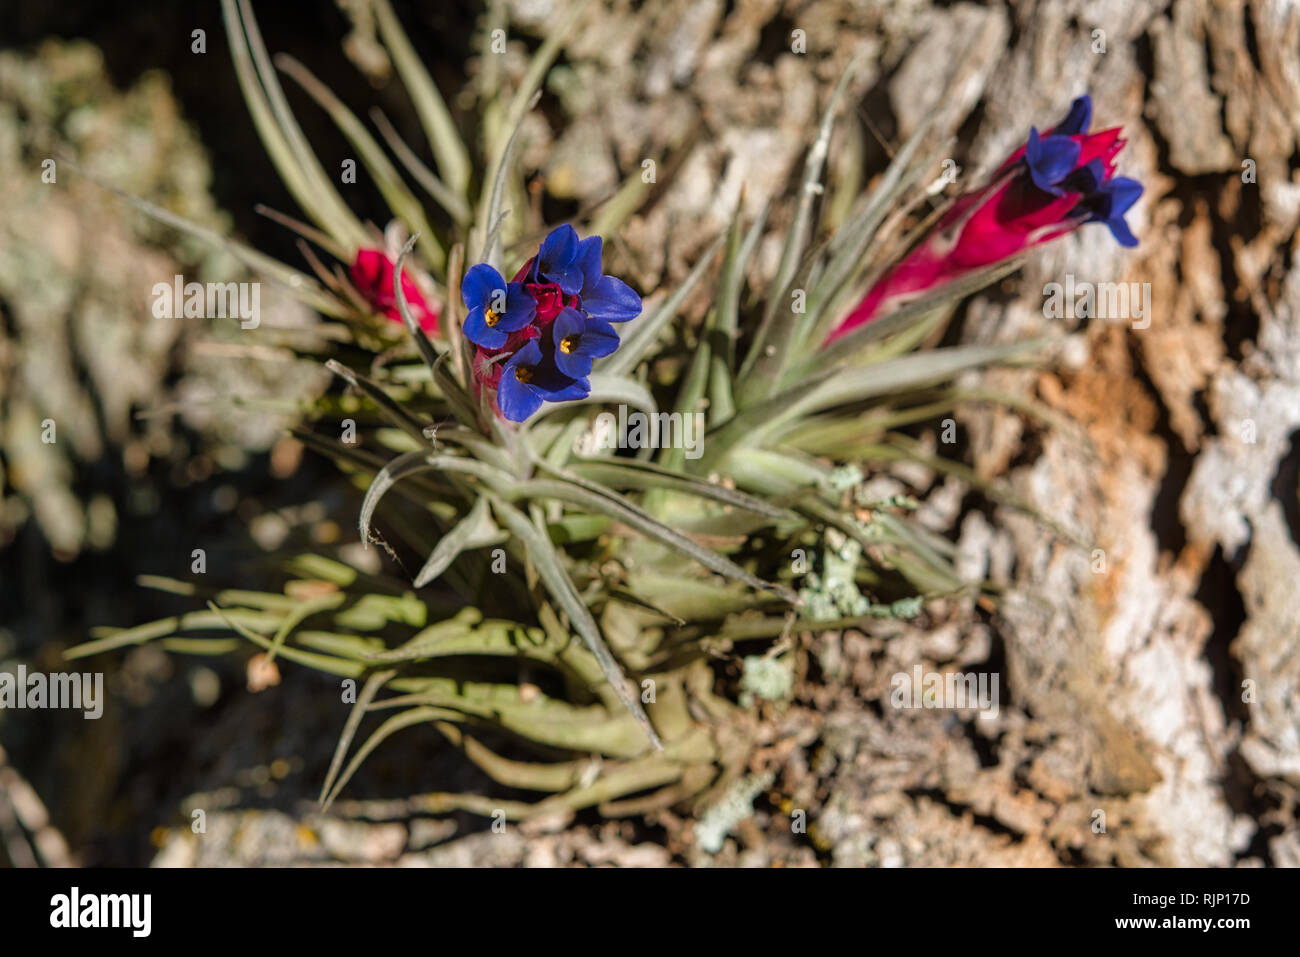 Colorful air carnation (Tillandsia Aeranthos) hanging from the bark of tree in a Pampa forest of Argentina. Detail of the pink and violet flower. Stock Photo